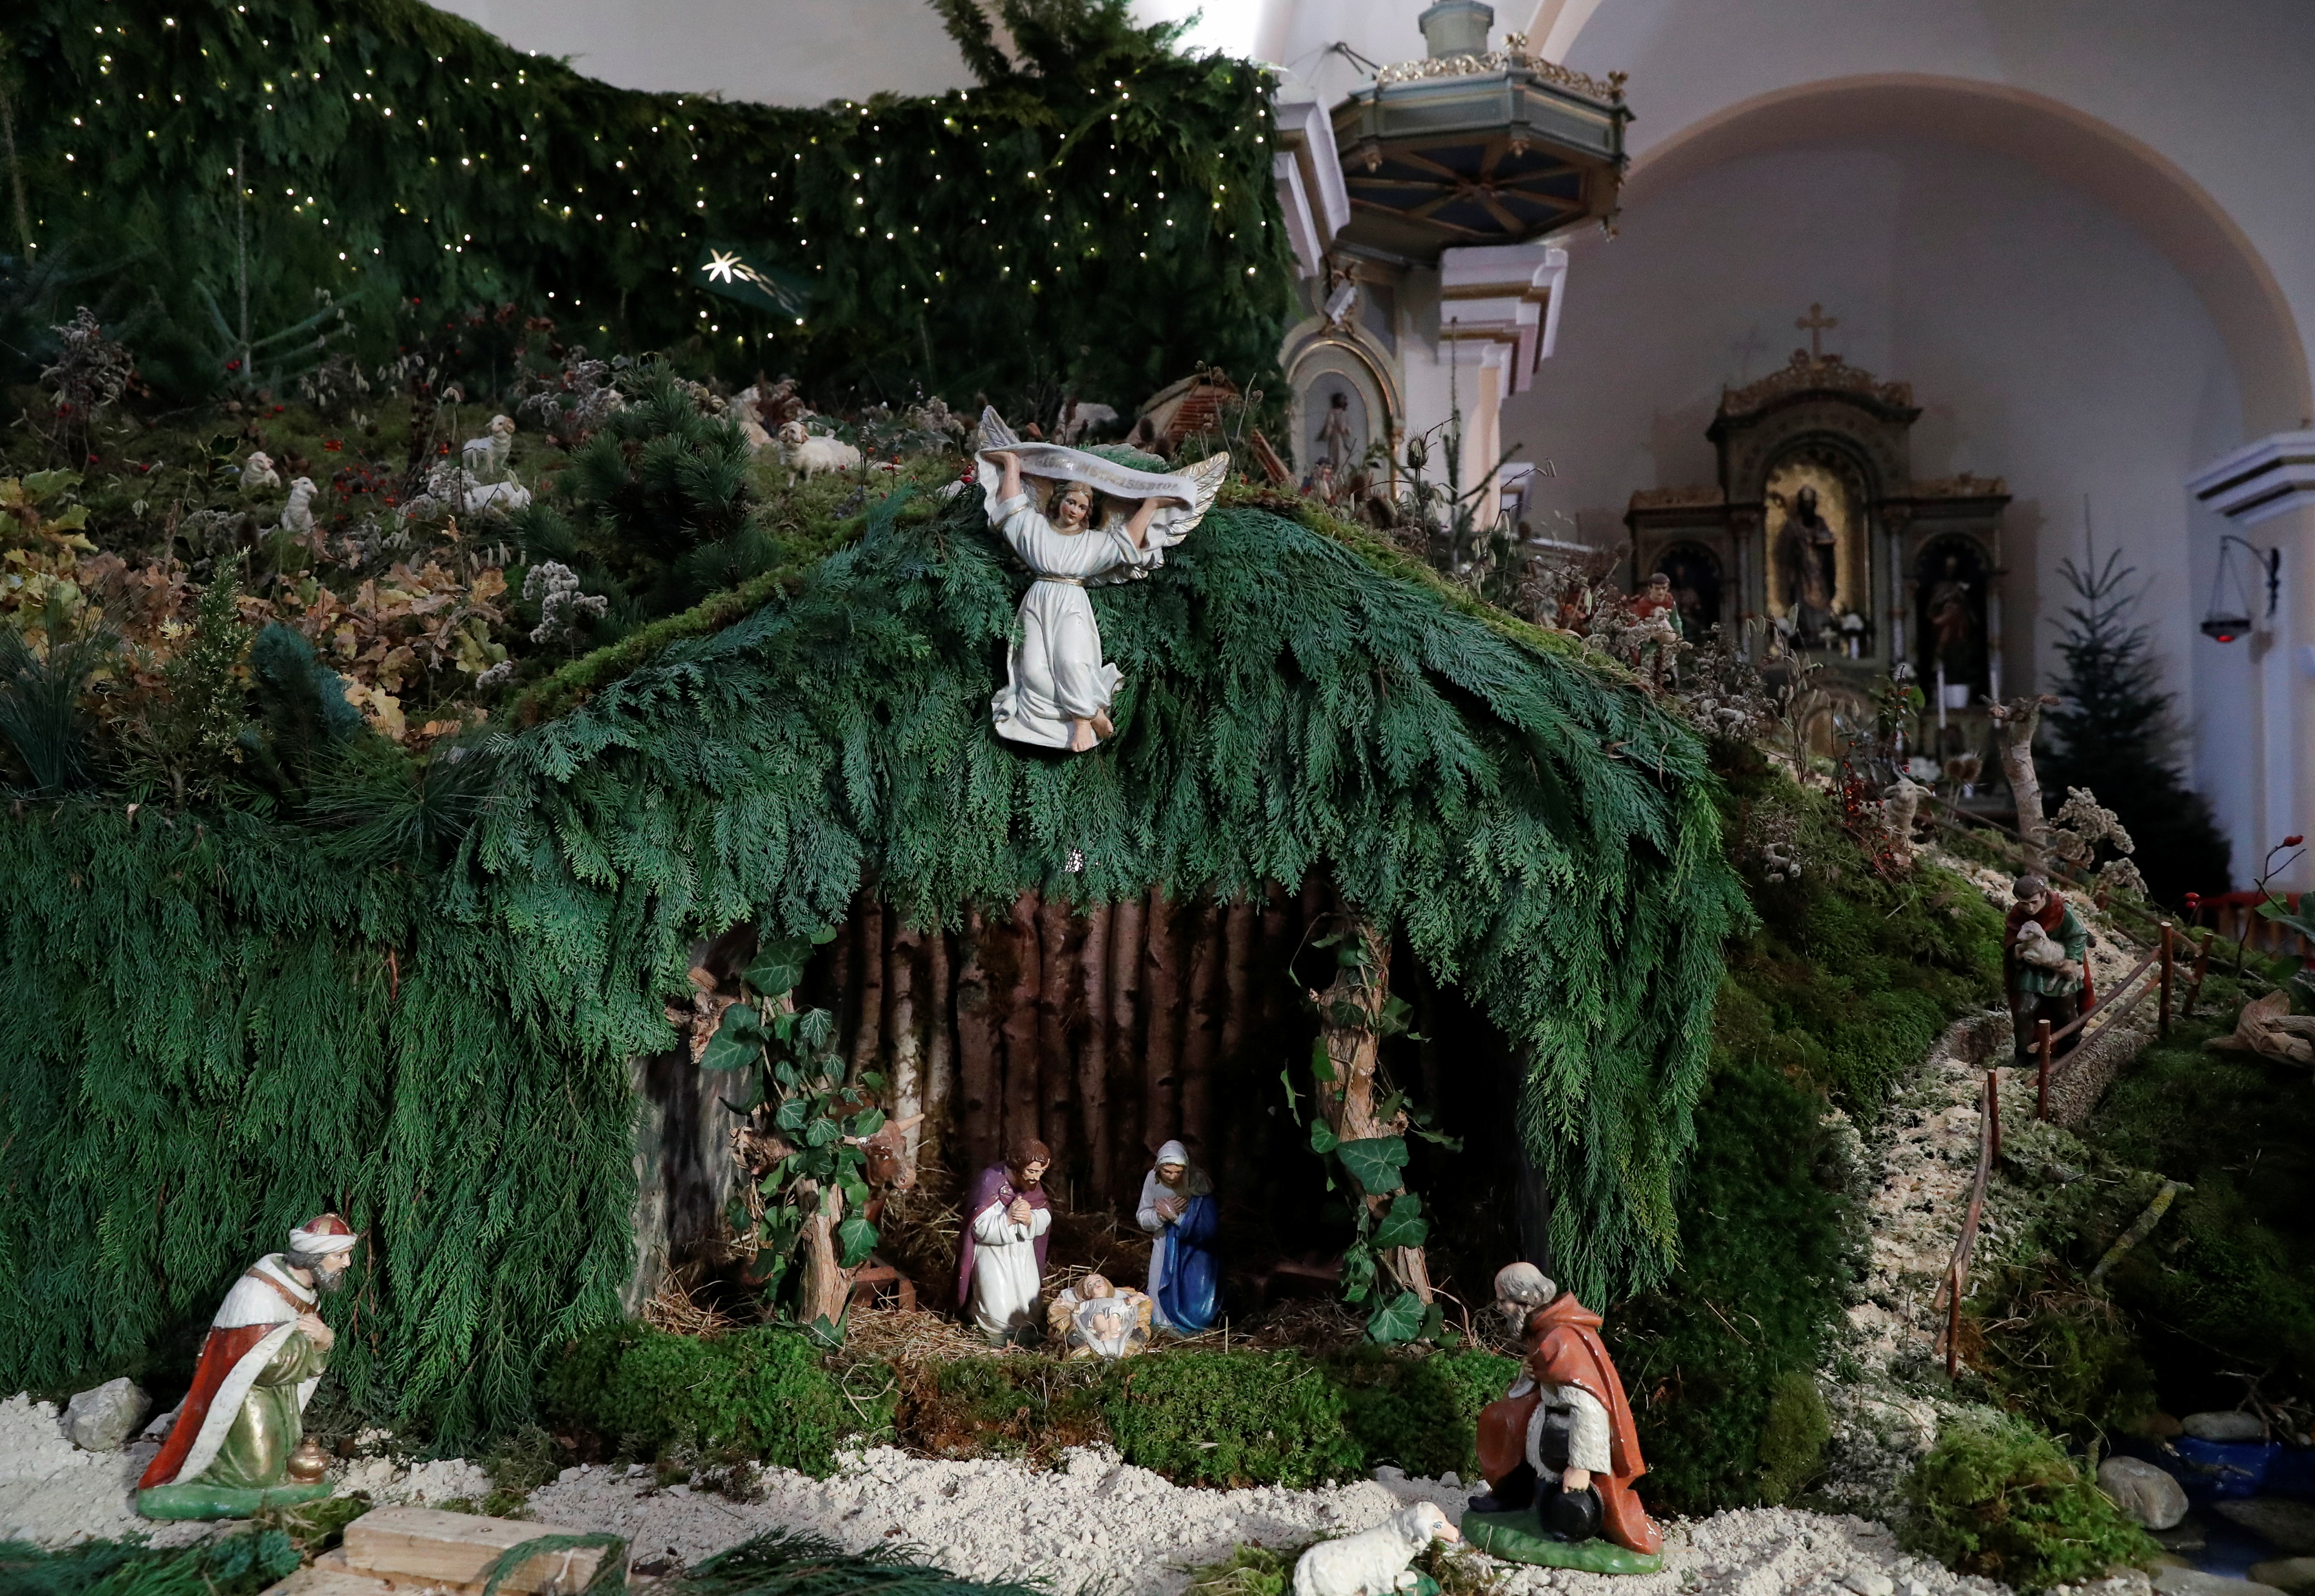 One of Europe's largest indoor nativity scenes is pictured at the St Martin Church in Vors